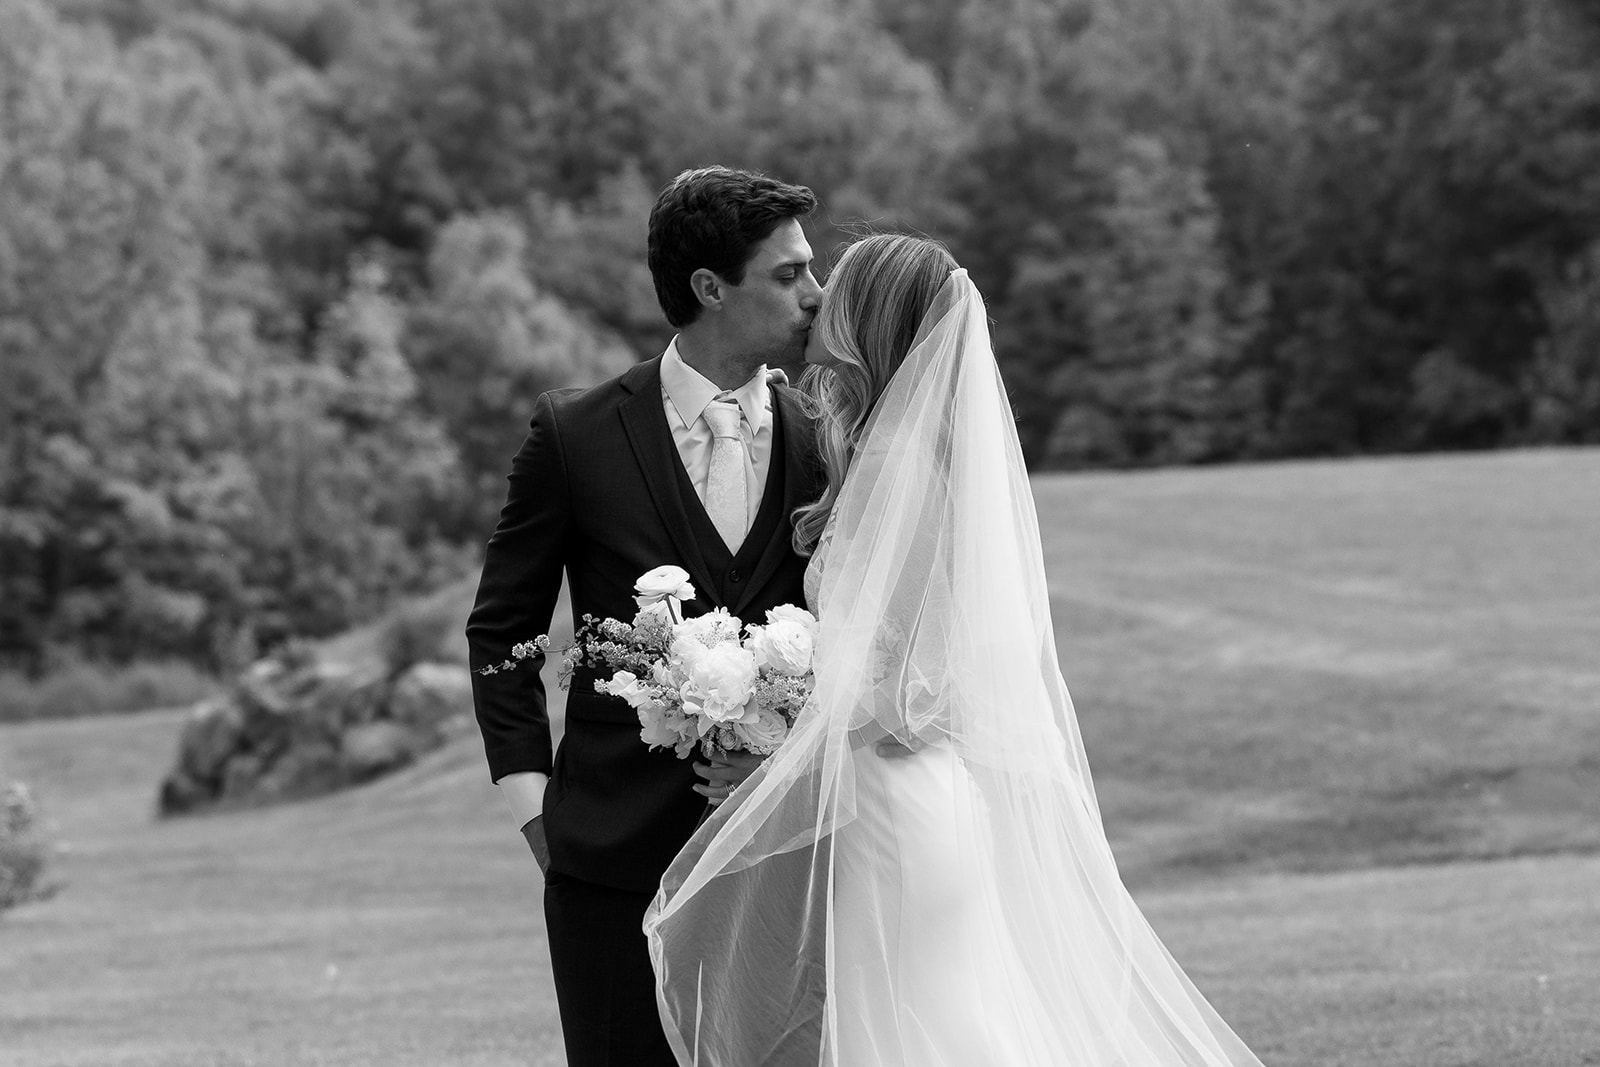 What to Look For in Your Wedding Photographer | Montreal Wedding Photographer